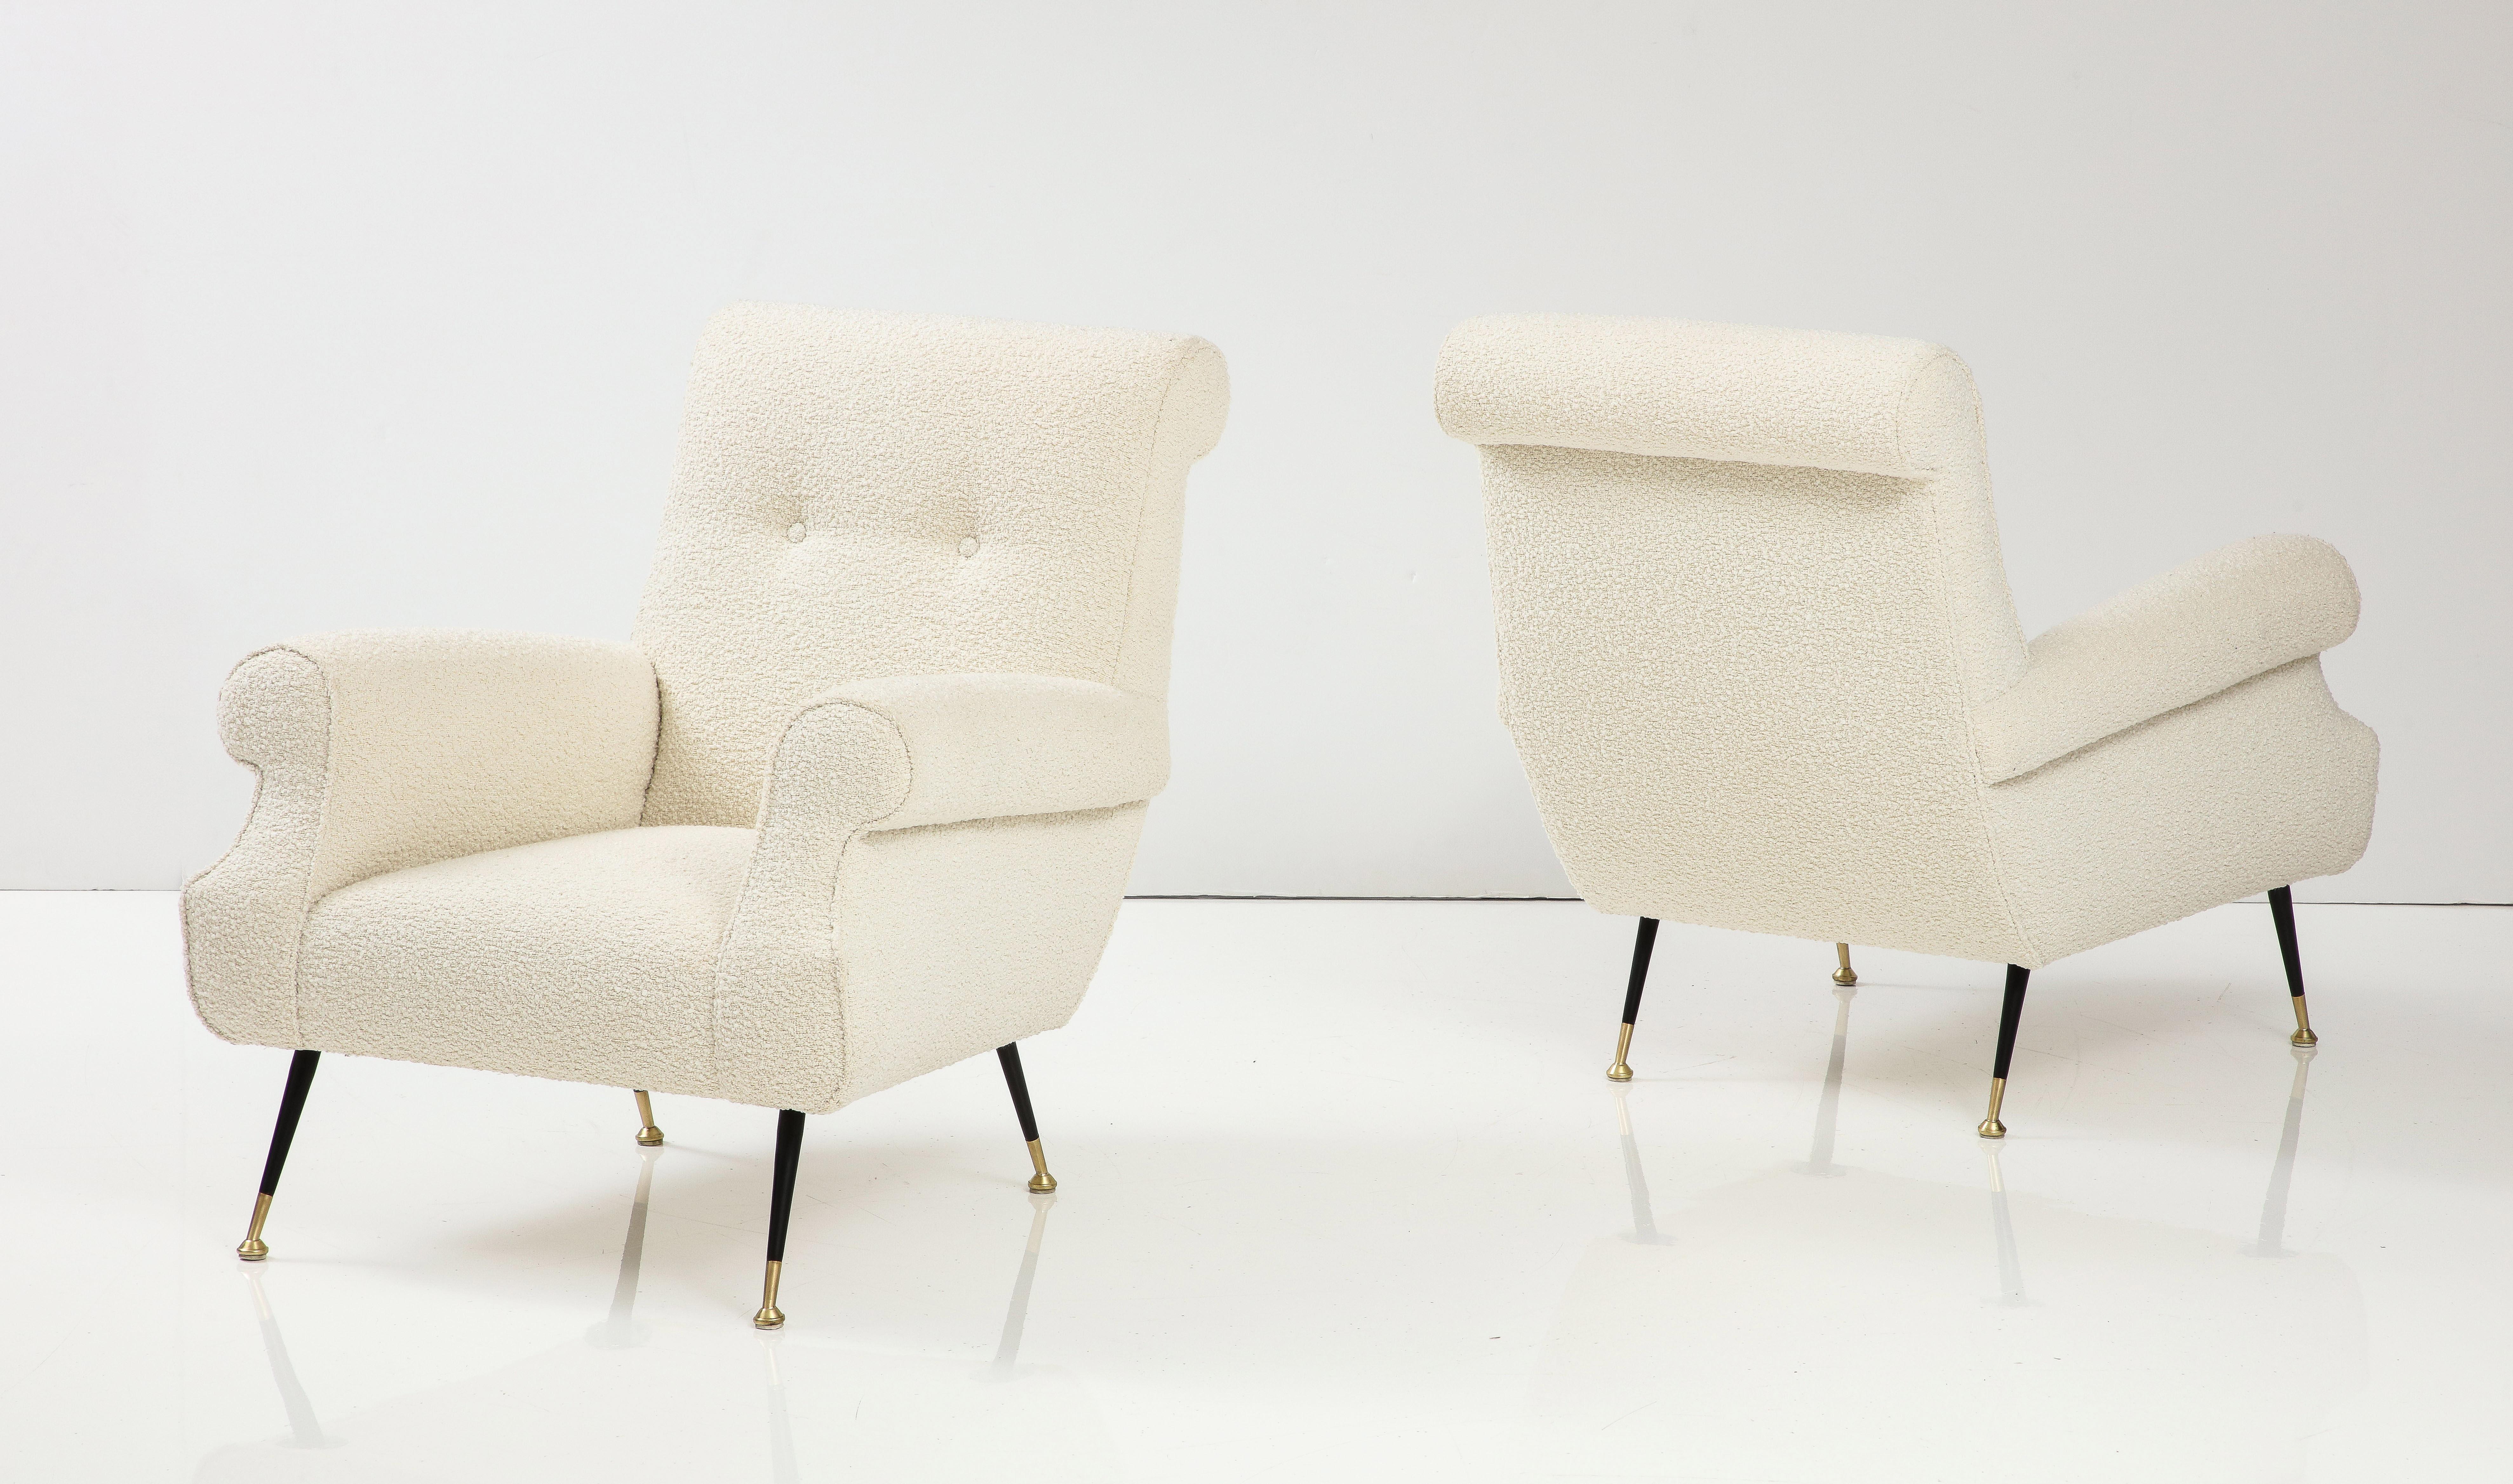 Pair of Italian Modernist Lounge Chairs, Italy, circa 1950 For Sale 3